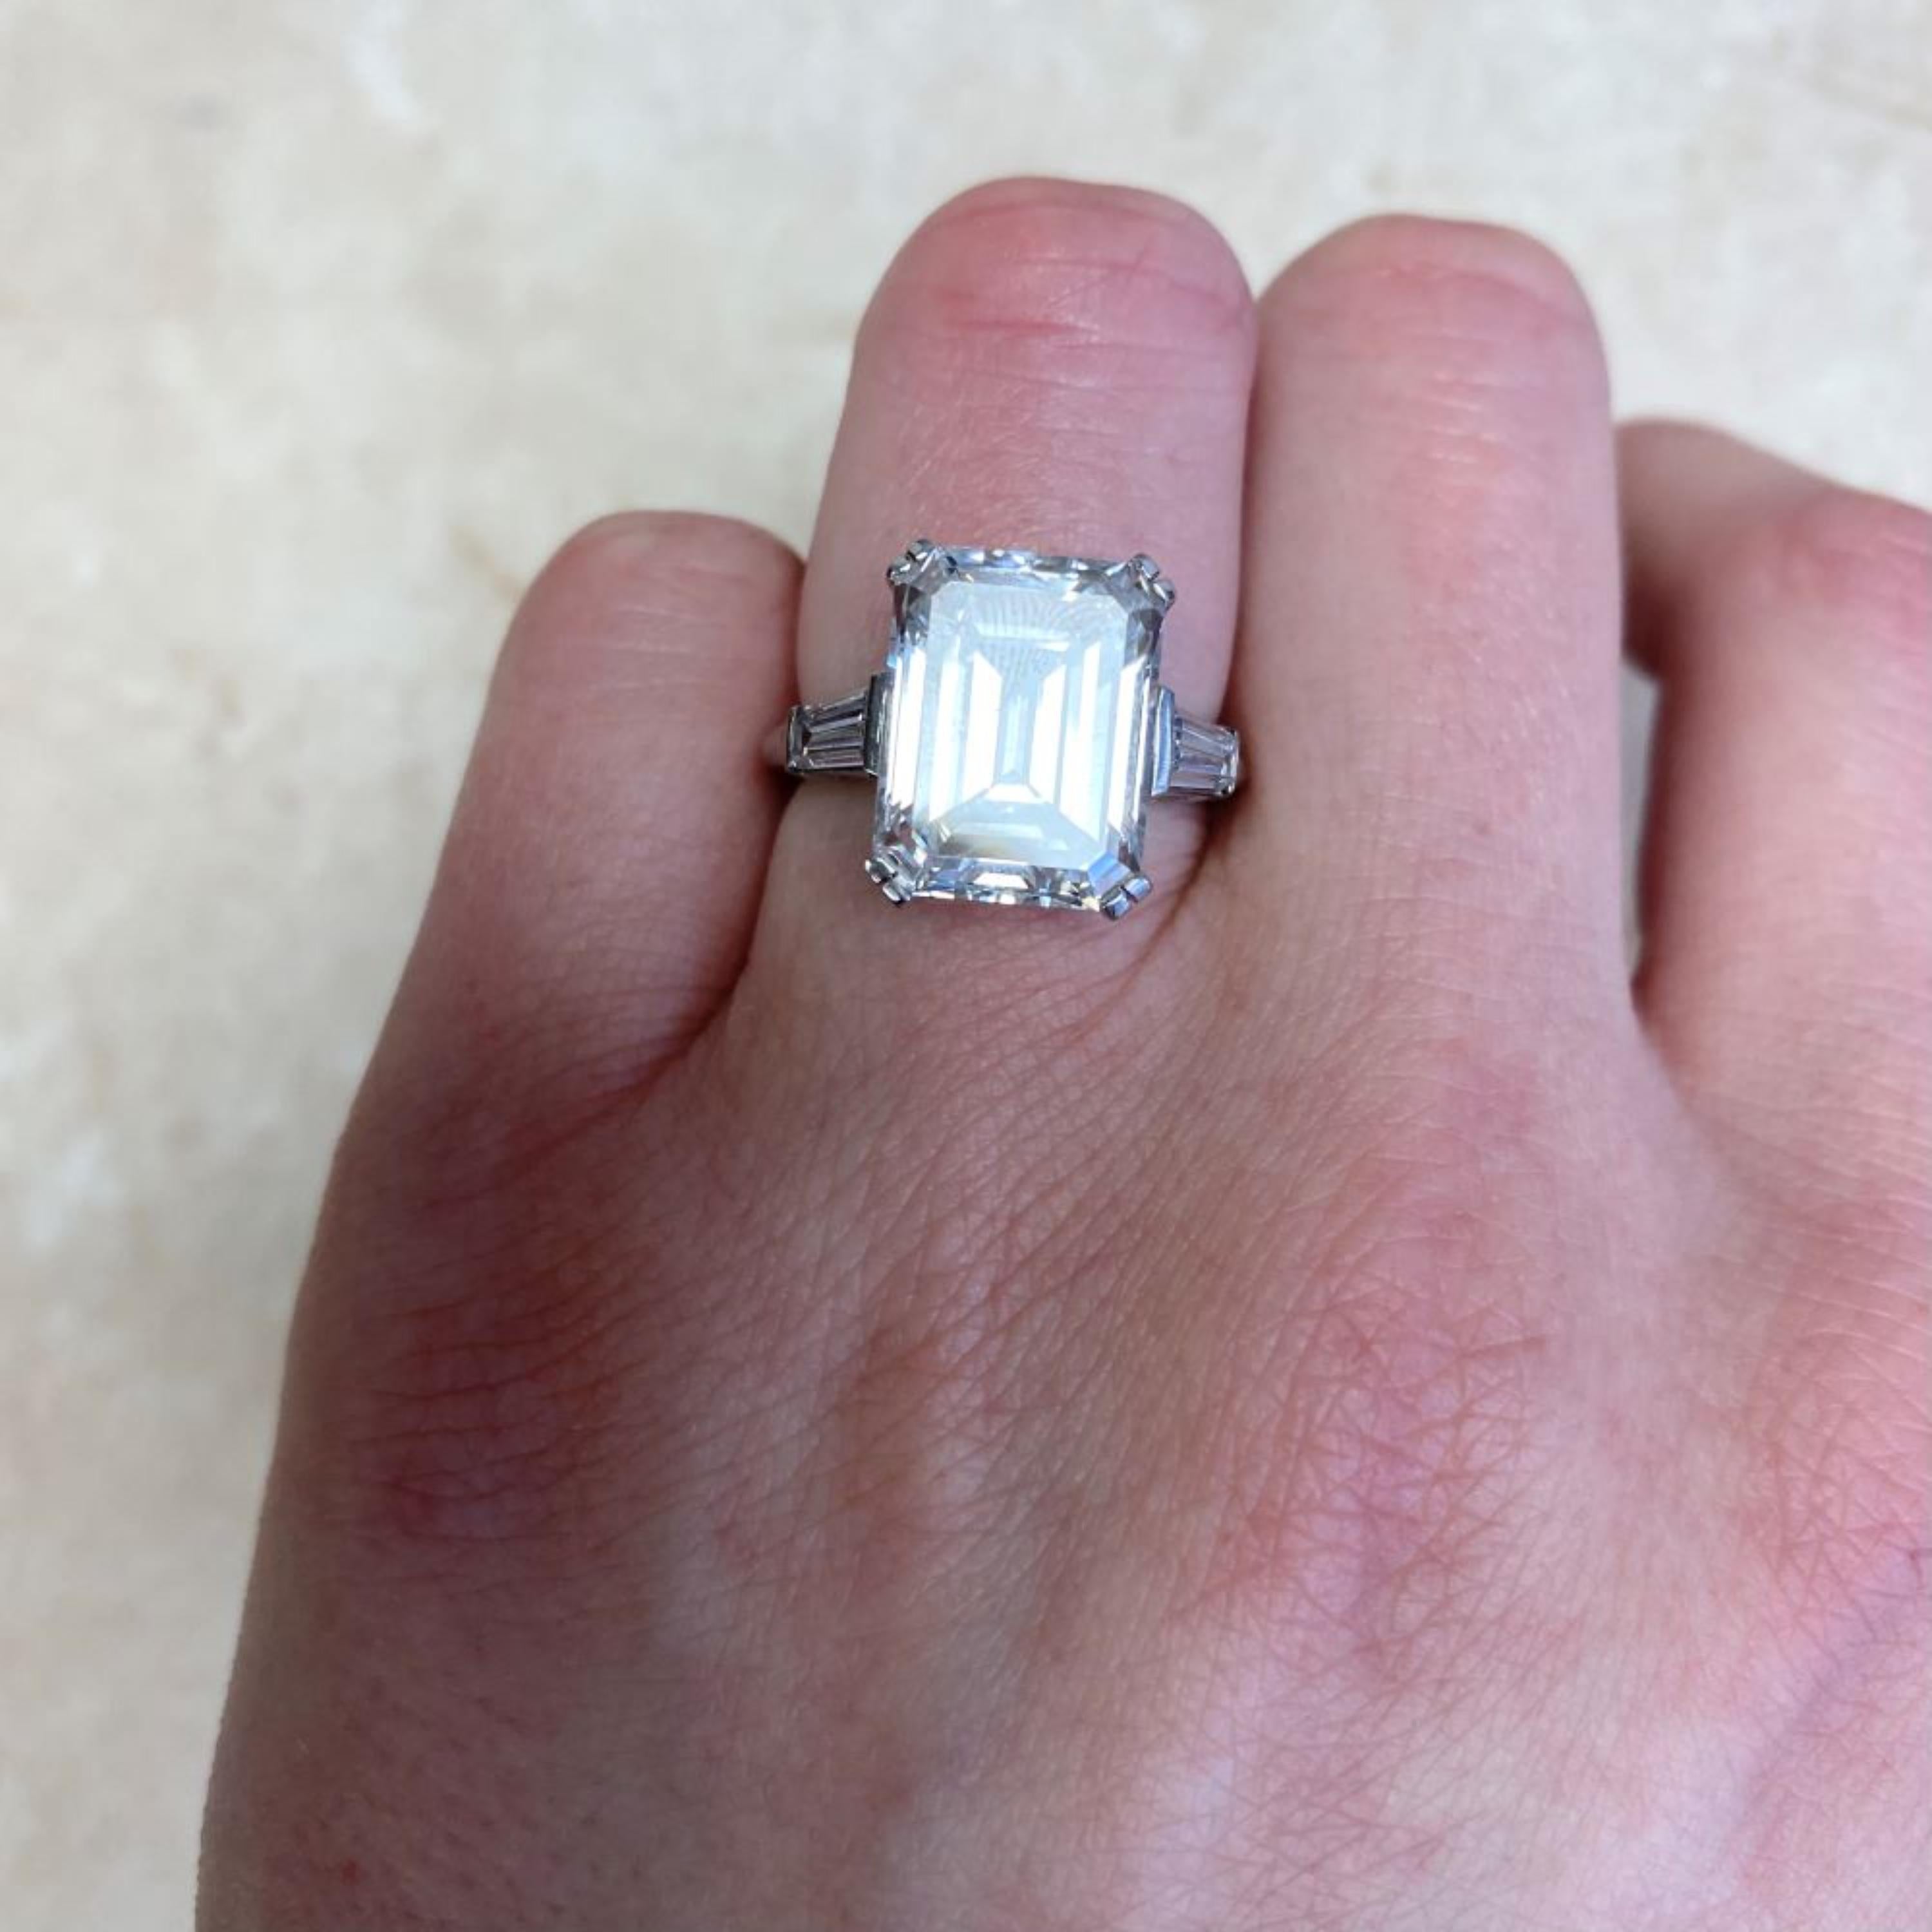 Platinum GIA Certified 6.42 Carat Emerald Cut Diamond Three-Stone Ring

GIA Certificate is Available Upon Request.

A stunning ring featuring IGI/GIA Certified 6.42 Carat Natural Diamond and Diamond Accents set in Platinum.

A Diamond Is Forever -